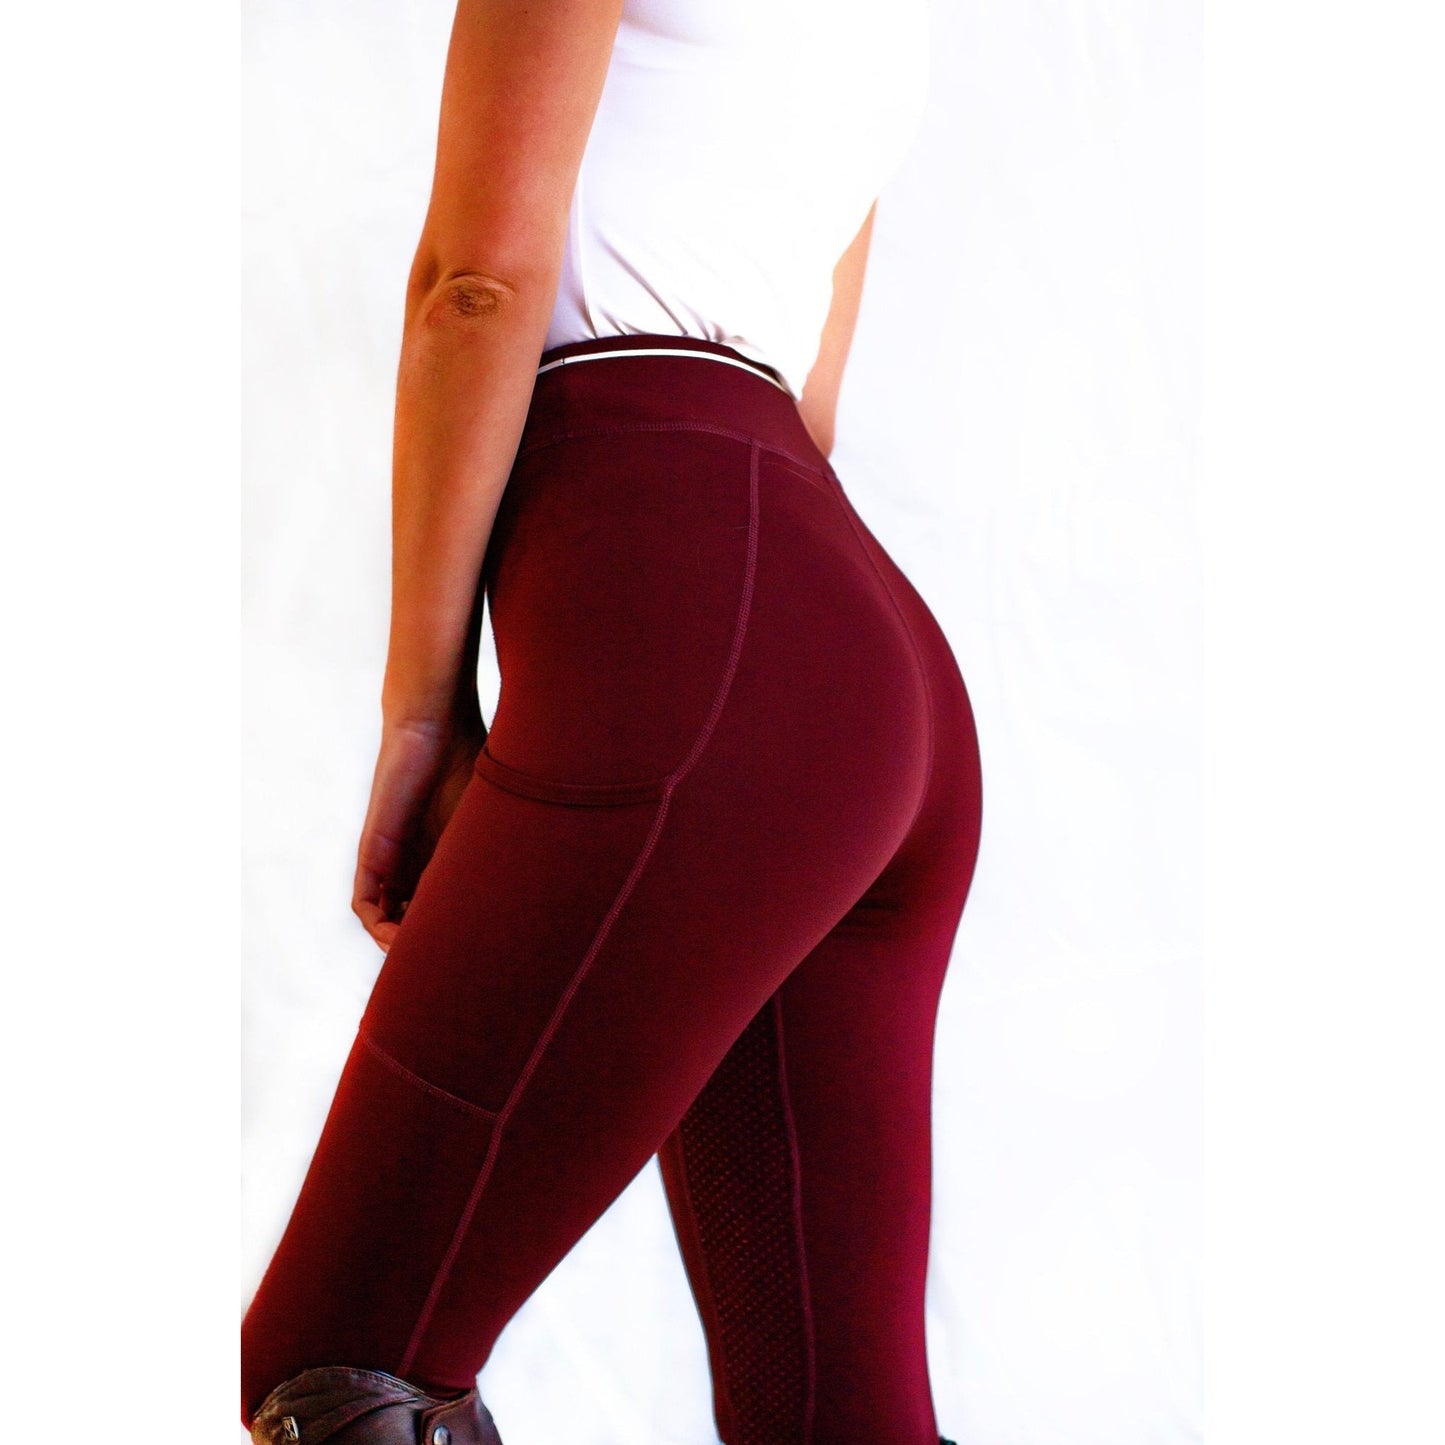 Person wearing maroon horse riding tights against a white background.